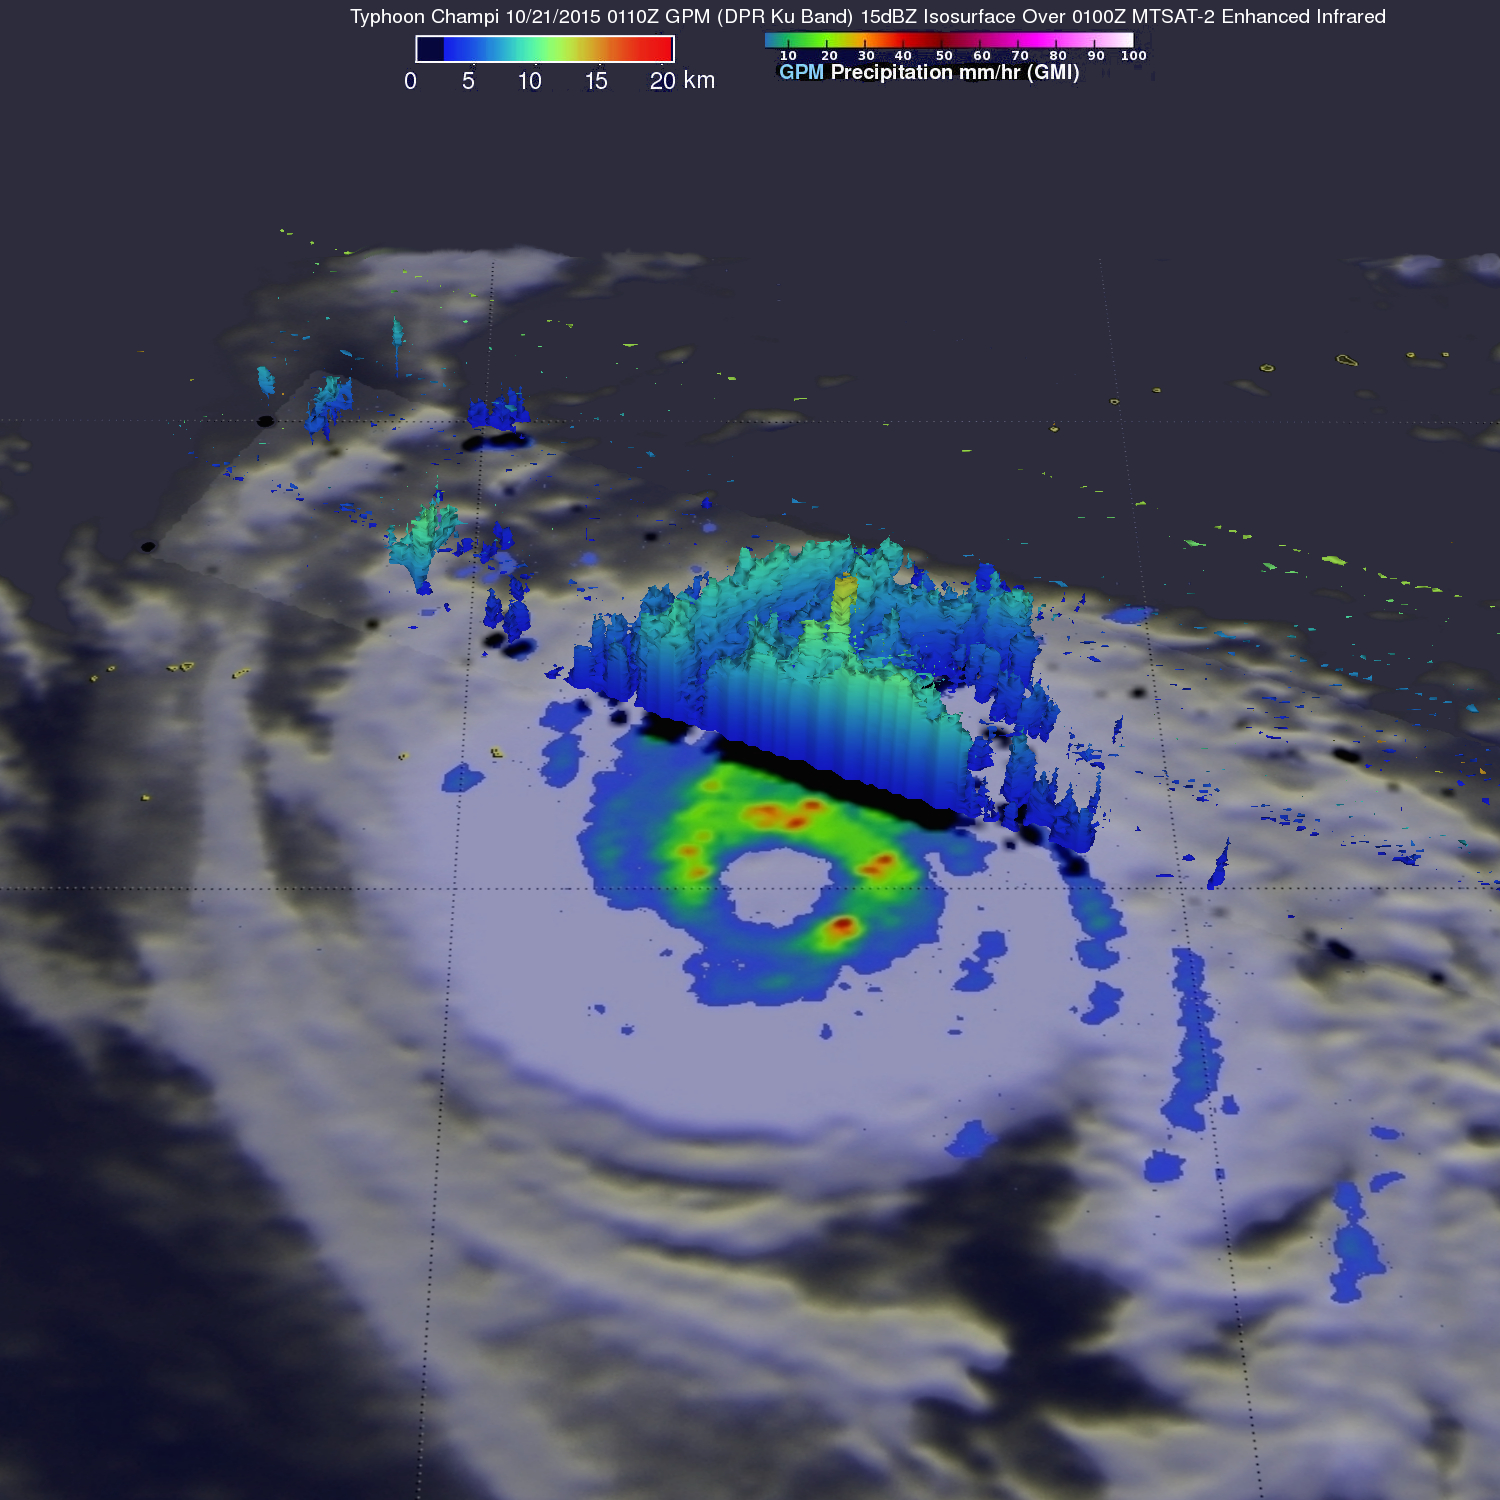 GPM saw that Typhoon Champi had a large eye